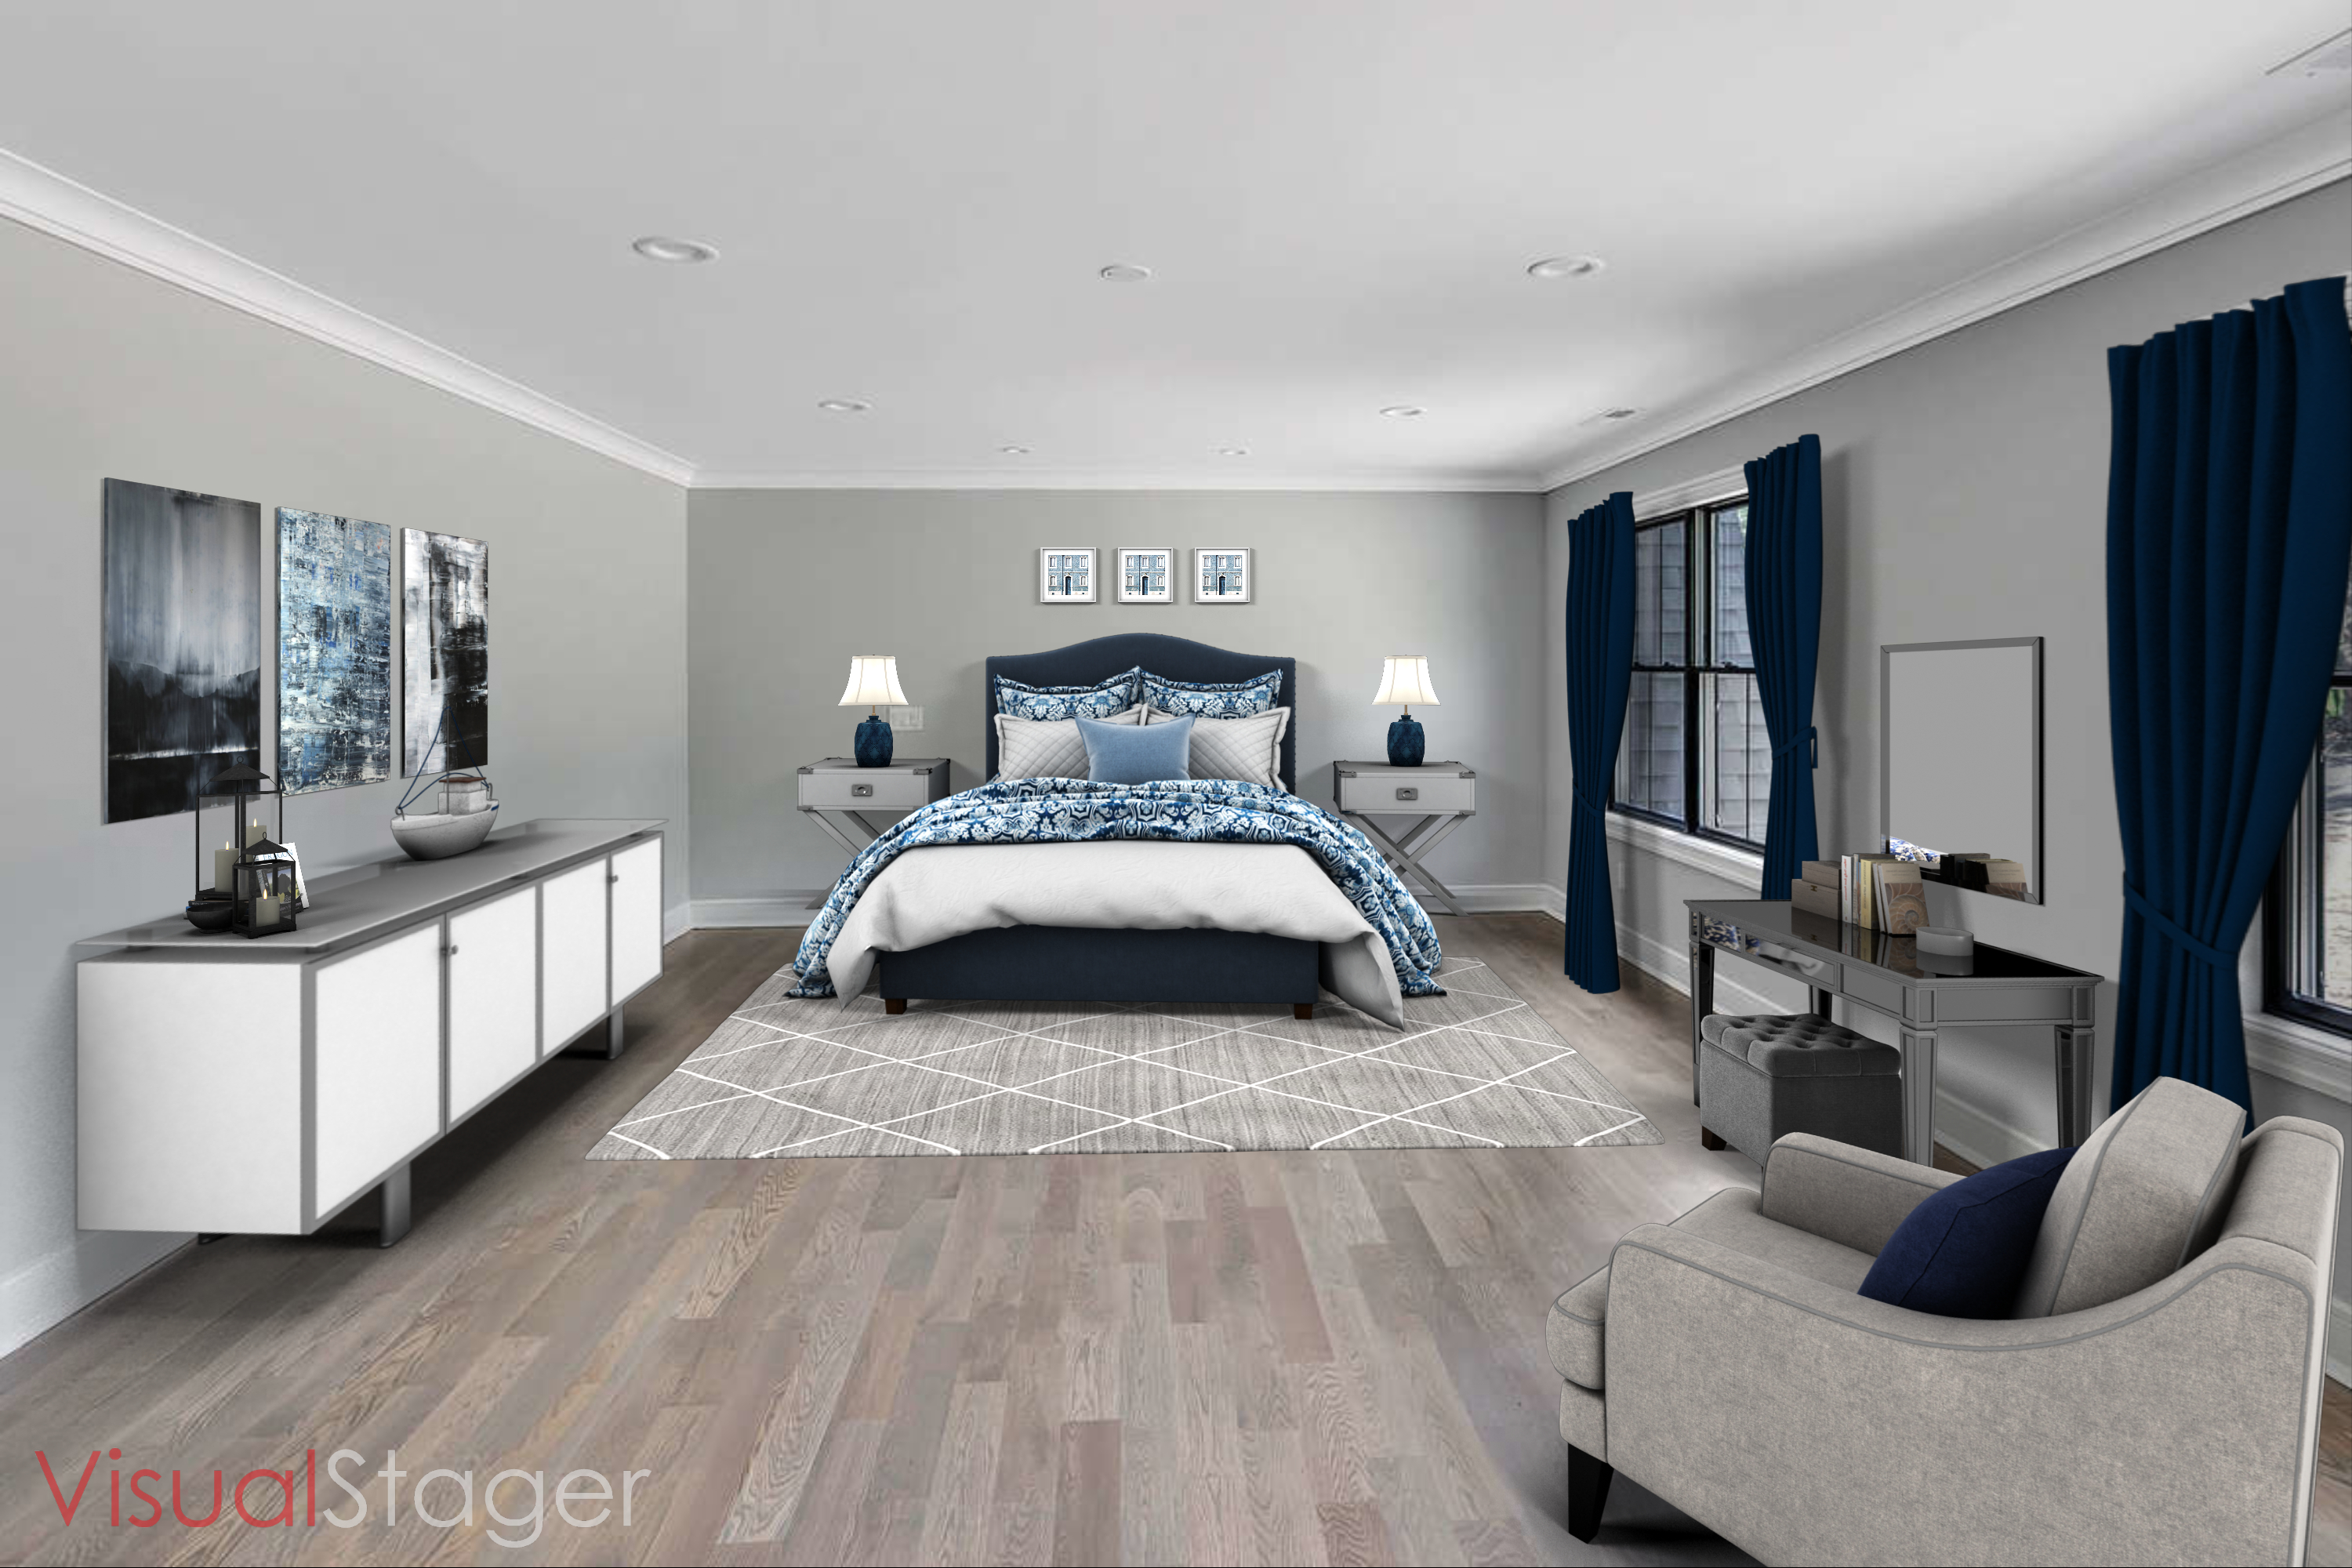 Bedroom - Virtual Staging After